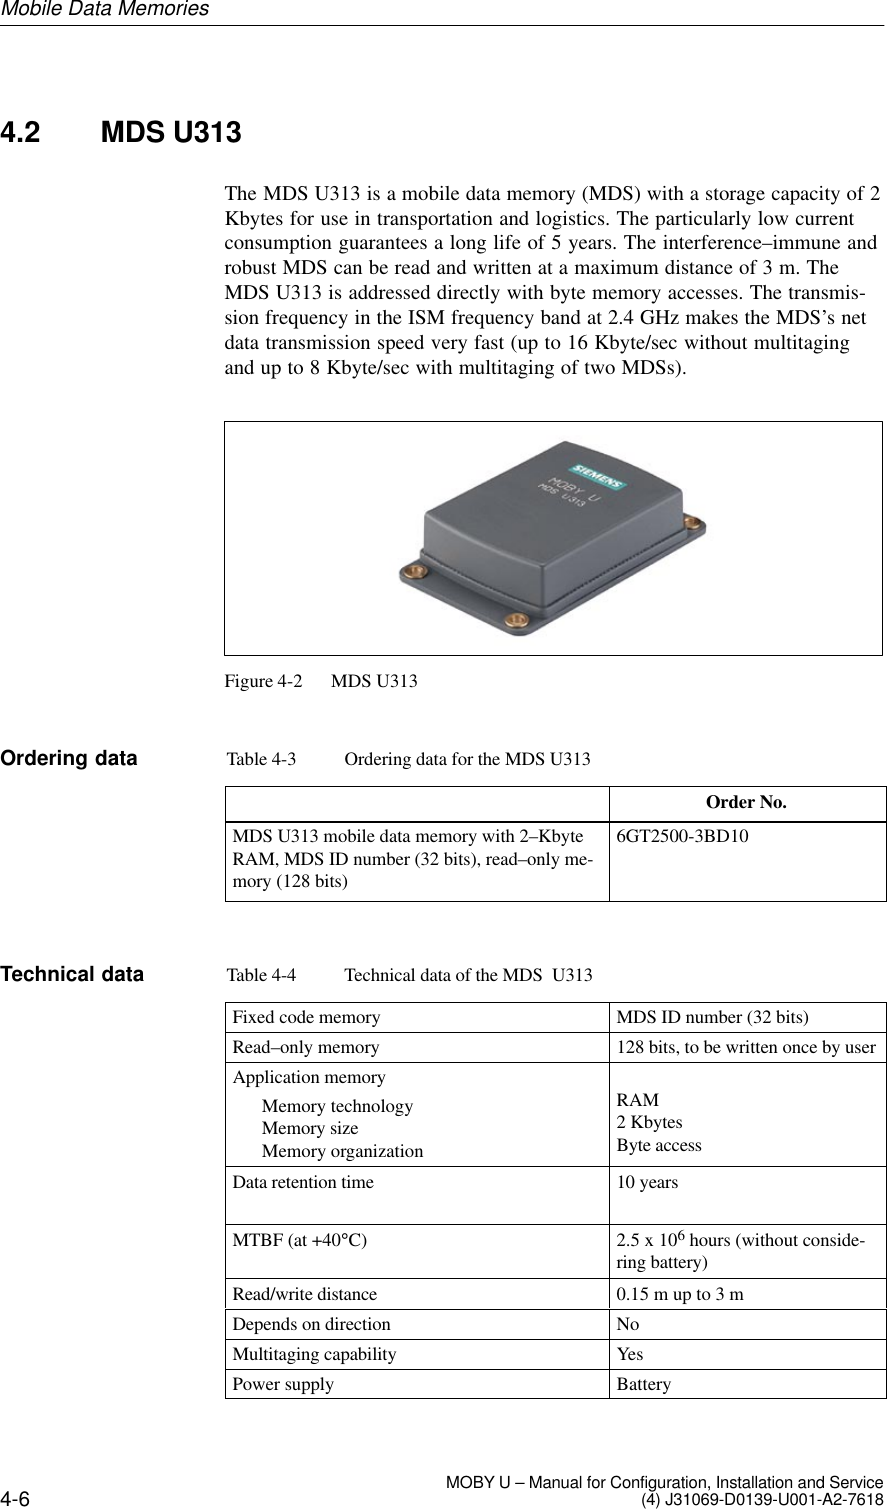 4-6 MOBY U – Manual for Configuration, Installation and Service(4) J31069-D0139-U001-A2-76184.2 MDS U313The MDS U313 is a mobile data memory (MDS) with a storage capacity of 2Kbytes for use in transportation and logistics. The particularly low currentconsumption guarantees a long life of 5 years. The interference–immune androbust MDS can be read and written at a maximum distance of 3 m. TheMDS U313 is addressed directly with byte memory accesses. The transmis-sion frequency in the ISM frequency band at 2.4 GHz makes the MDS’s netdata transmission speed very fast (up to 16 Kbyte/sec without multitagingand up to 8 Kbyte/sec with multitaging of two MDSs).Figure 4-2 MDS U313Table 4-3 Ordering data for the MDS U313Order No.MDS U313 mobile data memory with 2–KbyteRAM, MDS ID number (32 bits), read–only me-mory (128 bits)6GT2500-3BD10Table 4-4 Technical data of the MDS  U313Fixed code memory MDS ID number (32 bits)Read–only memory 128 bits, to be written once by userApplication memoryMemory technologyMemory sizeMemory organizationRAM2 KbytesByte accessData retention time 10 yearsMTBF (at +40°C) 2.5 x 106 hours (without conside-ring battery)Read/write distance 0.15 m up to 3 mDepends on direction NoMultitaging capability YesPower supply BatteryOrdering dataTechnical dataMobile Data Memories